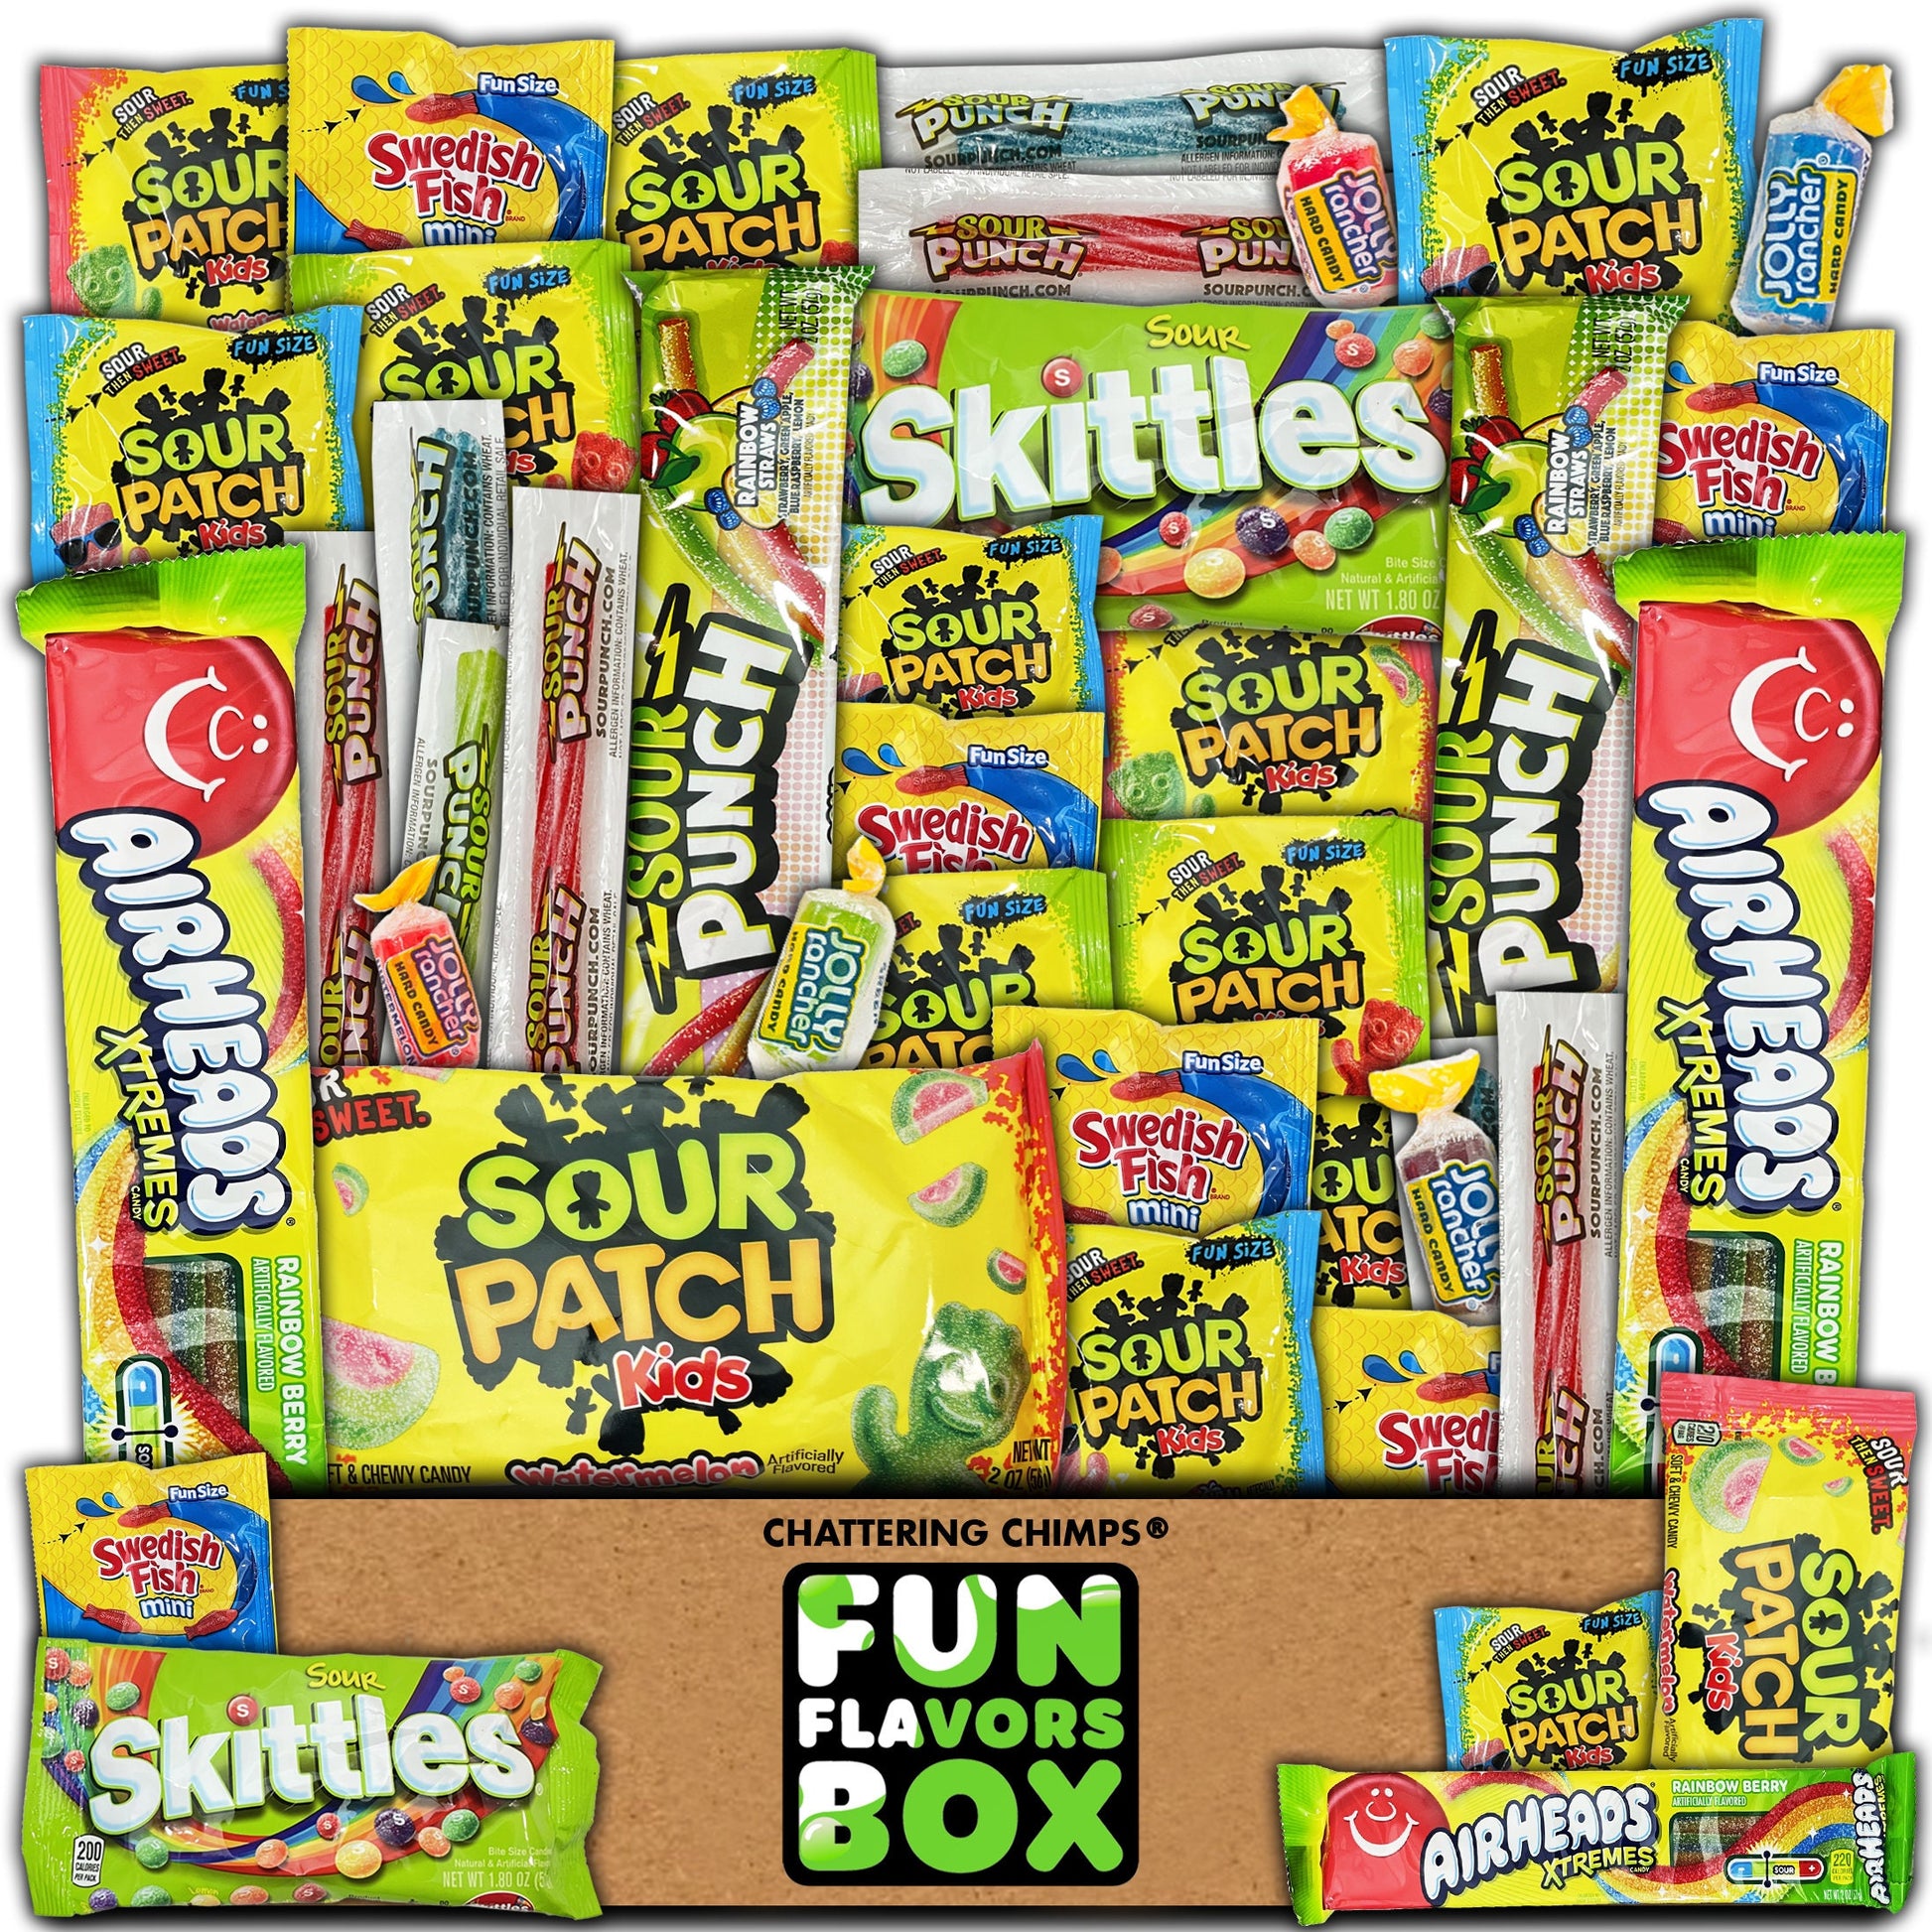 Fun Flavors Sour Candy Snack gift box includes airheads, swedish fish, sour punch, jolly ranchers, sour skittles and assorted other favorite sour candy